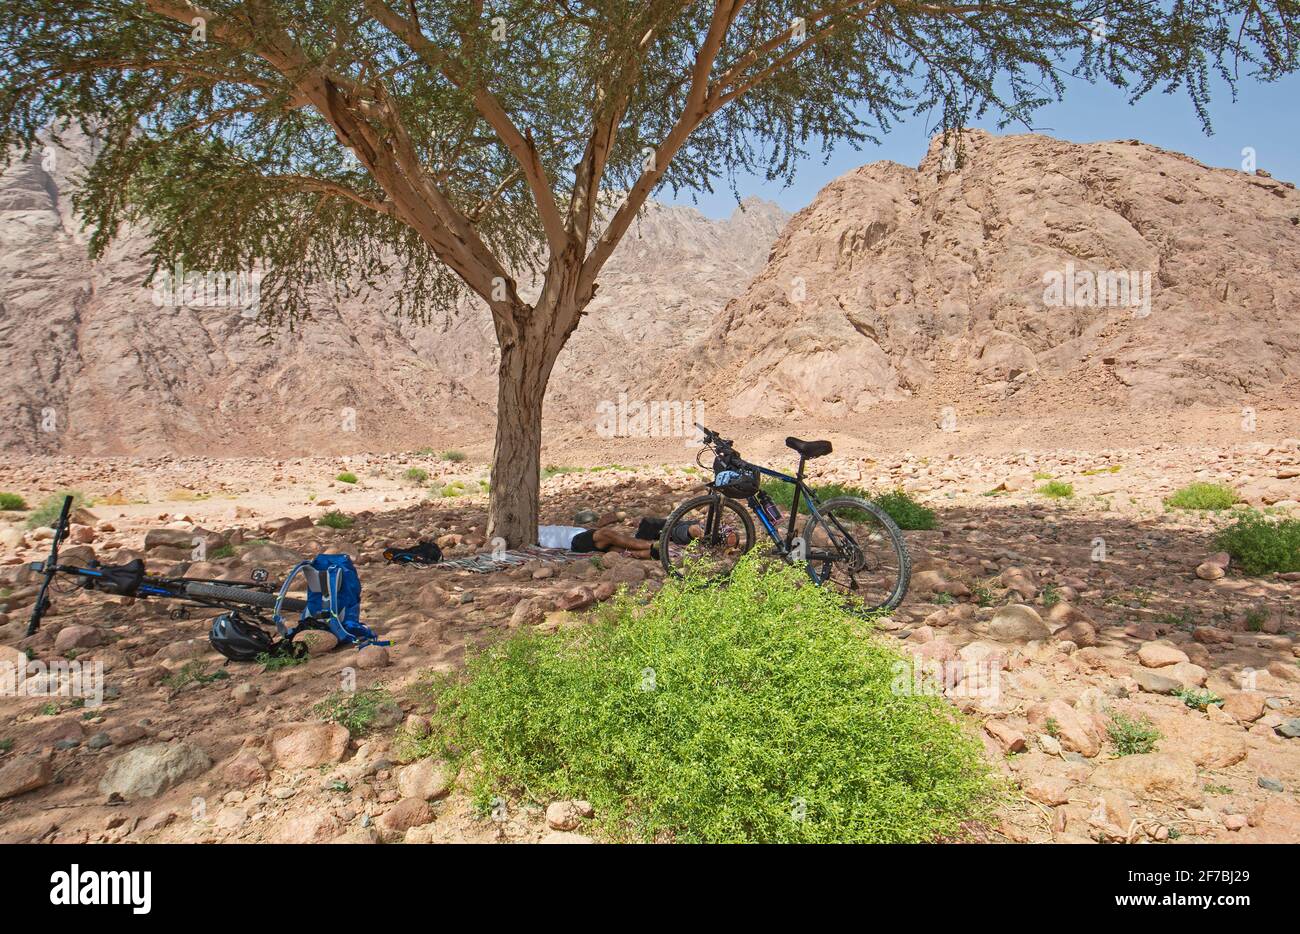 Landscape scenic view of desolate barren eastern desert in Egypt with adventure cyclists relaxing under tree Stock Photo